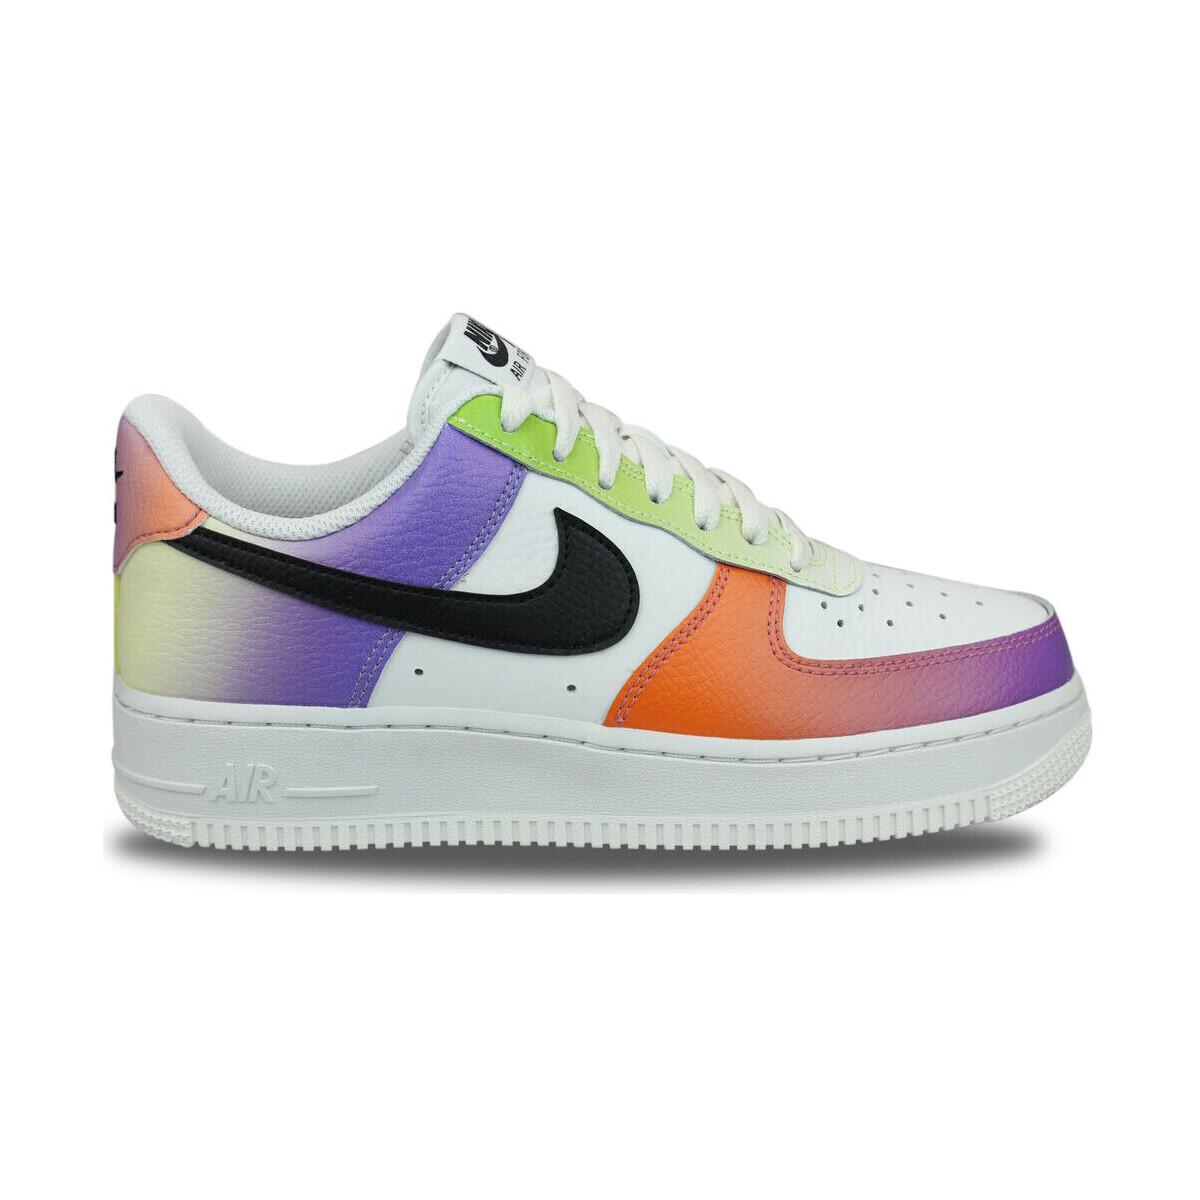 Scarpe Donna Sneakers basse Nike Air Force 1 Low '07 Multi-Color Gradient Bianco